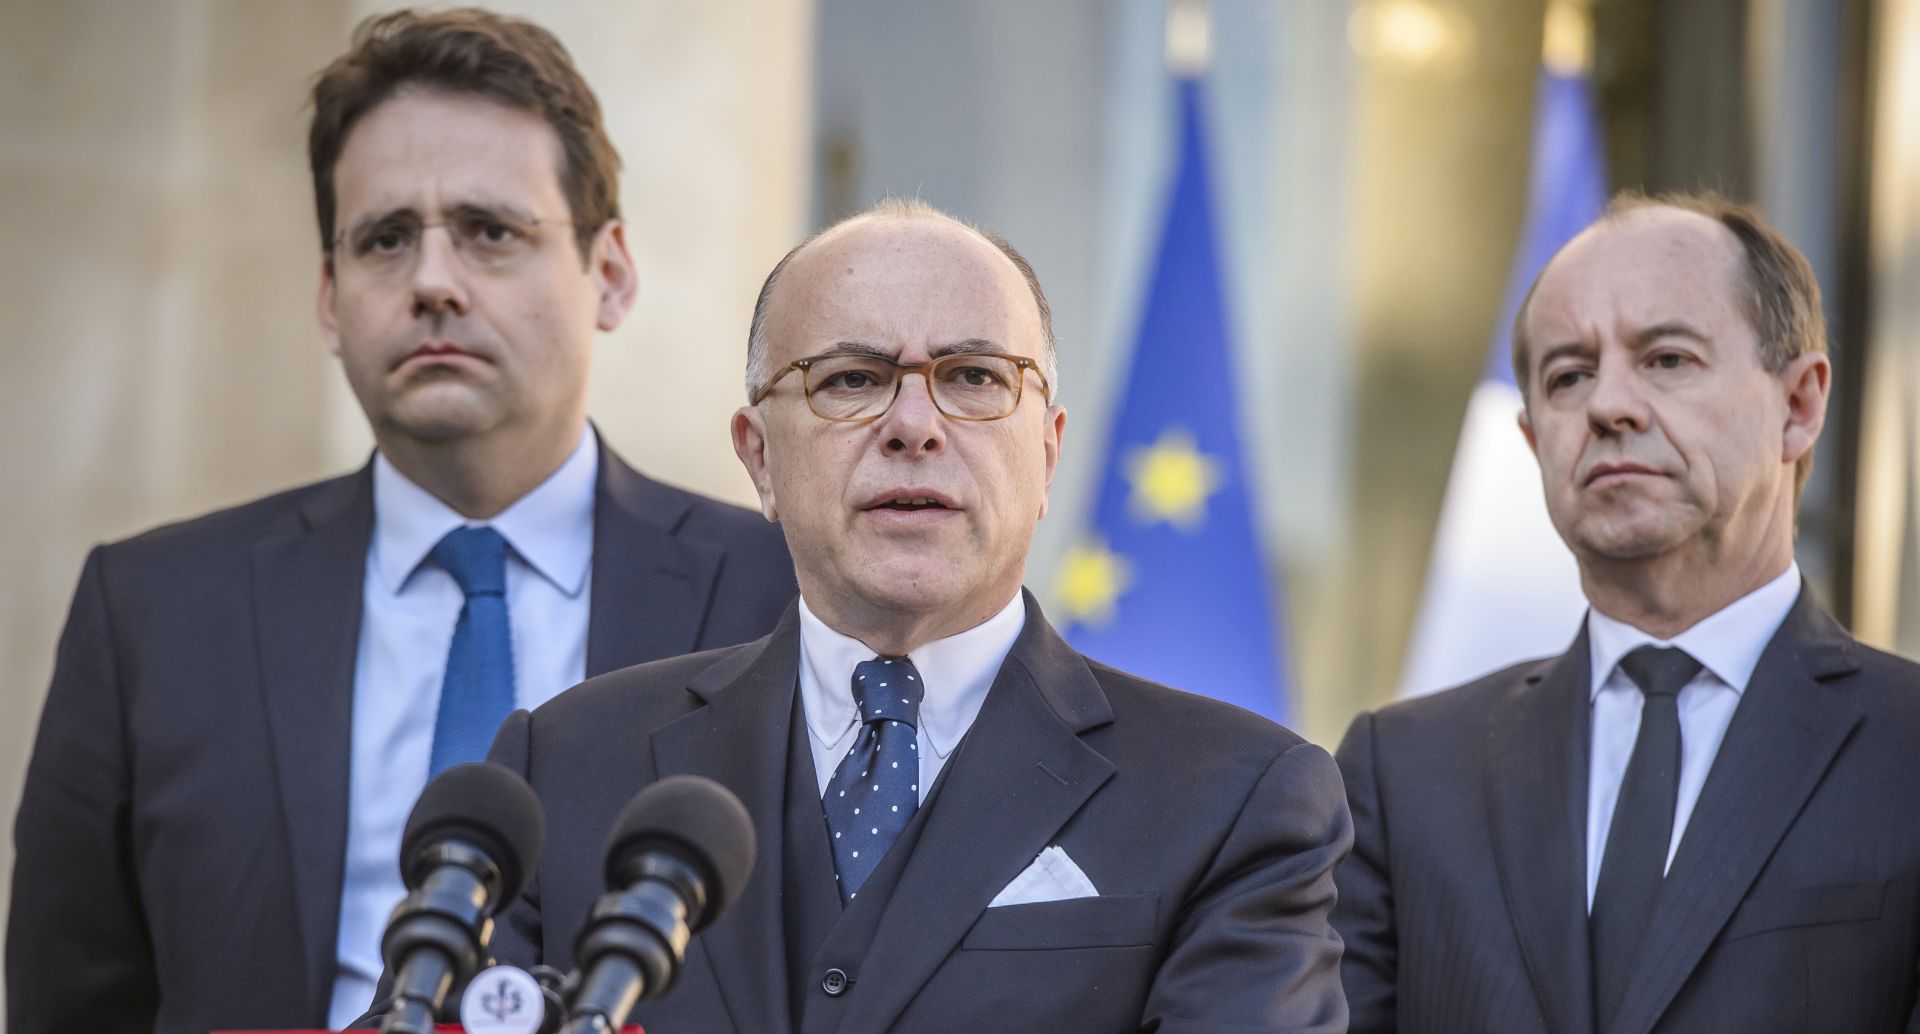 epa05918643 French Prime Minister Bernard Cazeneuve (C), flanked by Interior Minister Mathias Fekl (L) and Justice Minister Jean-Jacques Urvoas (R), speaks to the media outside the Elysee Palace after a defense council meeting in Paris, France, 21 April 2017. The council met for a session after a police officer was killed in a terror attack near the Champs Elysees boulevard in Paris on late 20 April 2017, just three days before the first round of the presidential elections in France.  EPA/CHRISTOPHE PETIT TESSON